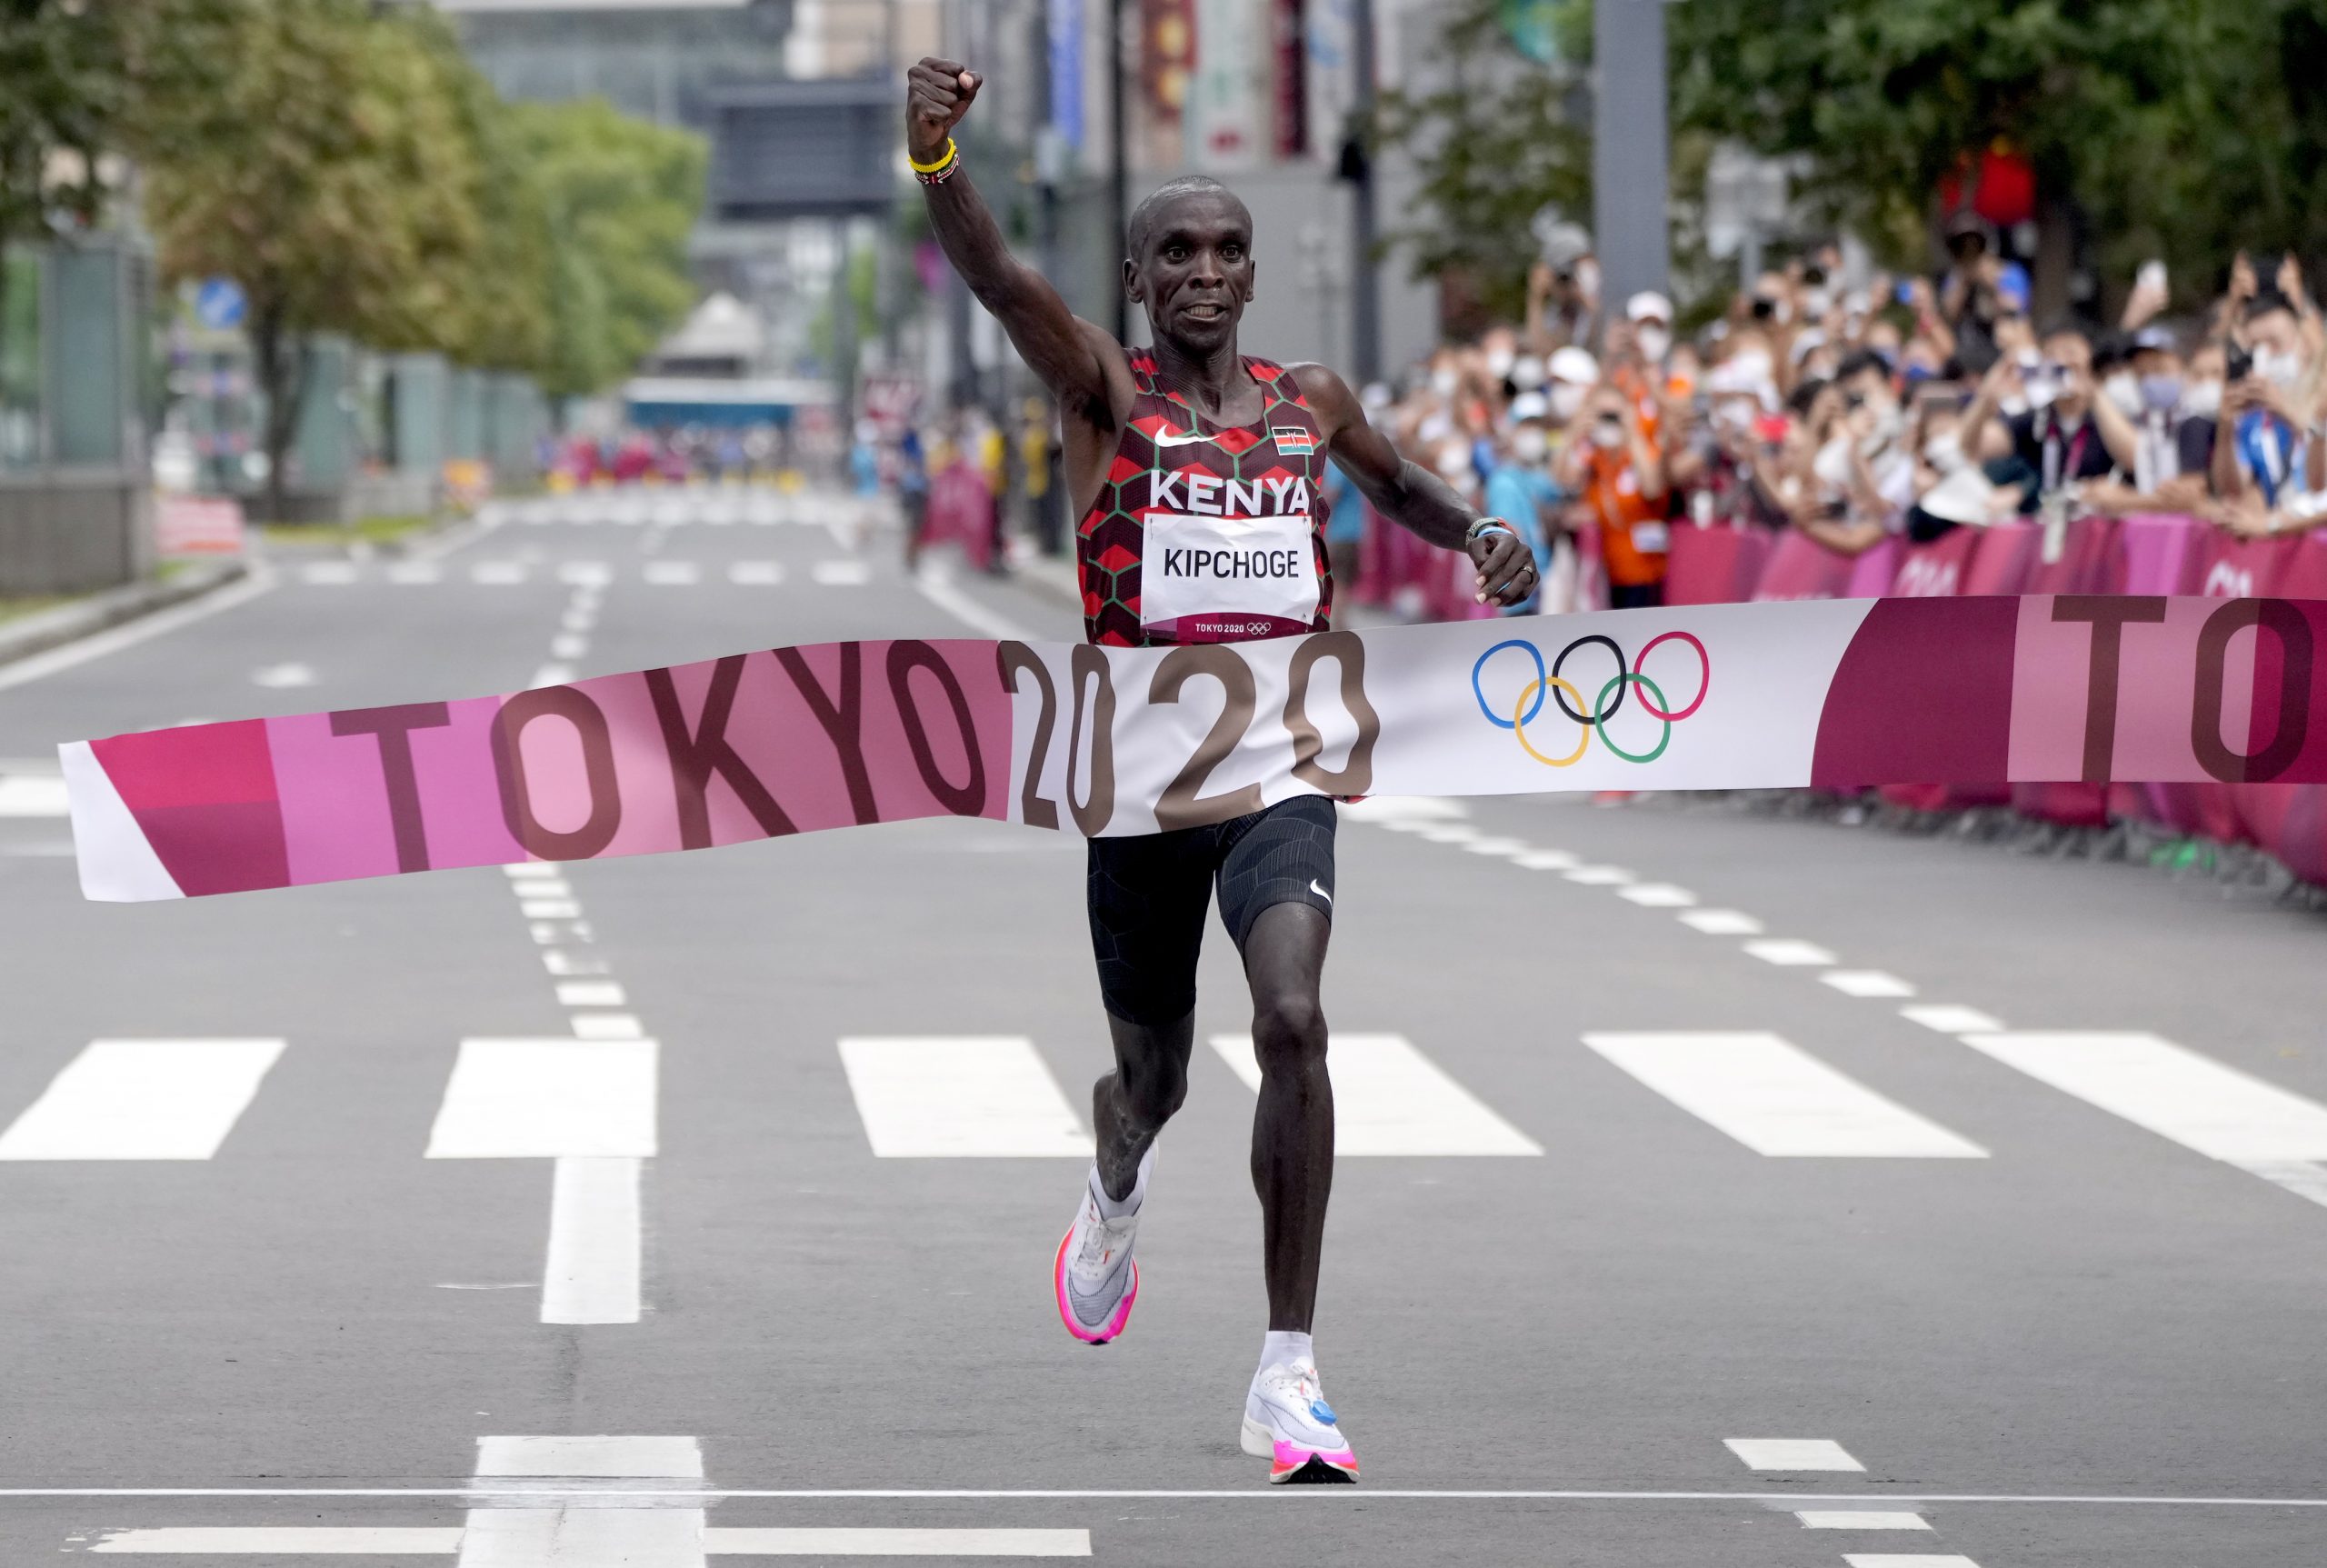 epa09404975 Eliud Kipchoge of Kenya reacts while crossing the finish line first to win the Gold medal in the Men's Marathon during the Athletics events of the Tokyo 2020 Olympic Games at the Odori Park in Sapporo, Japan, 08 August 2021.  EPA/KIMIMASA MAYAMA